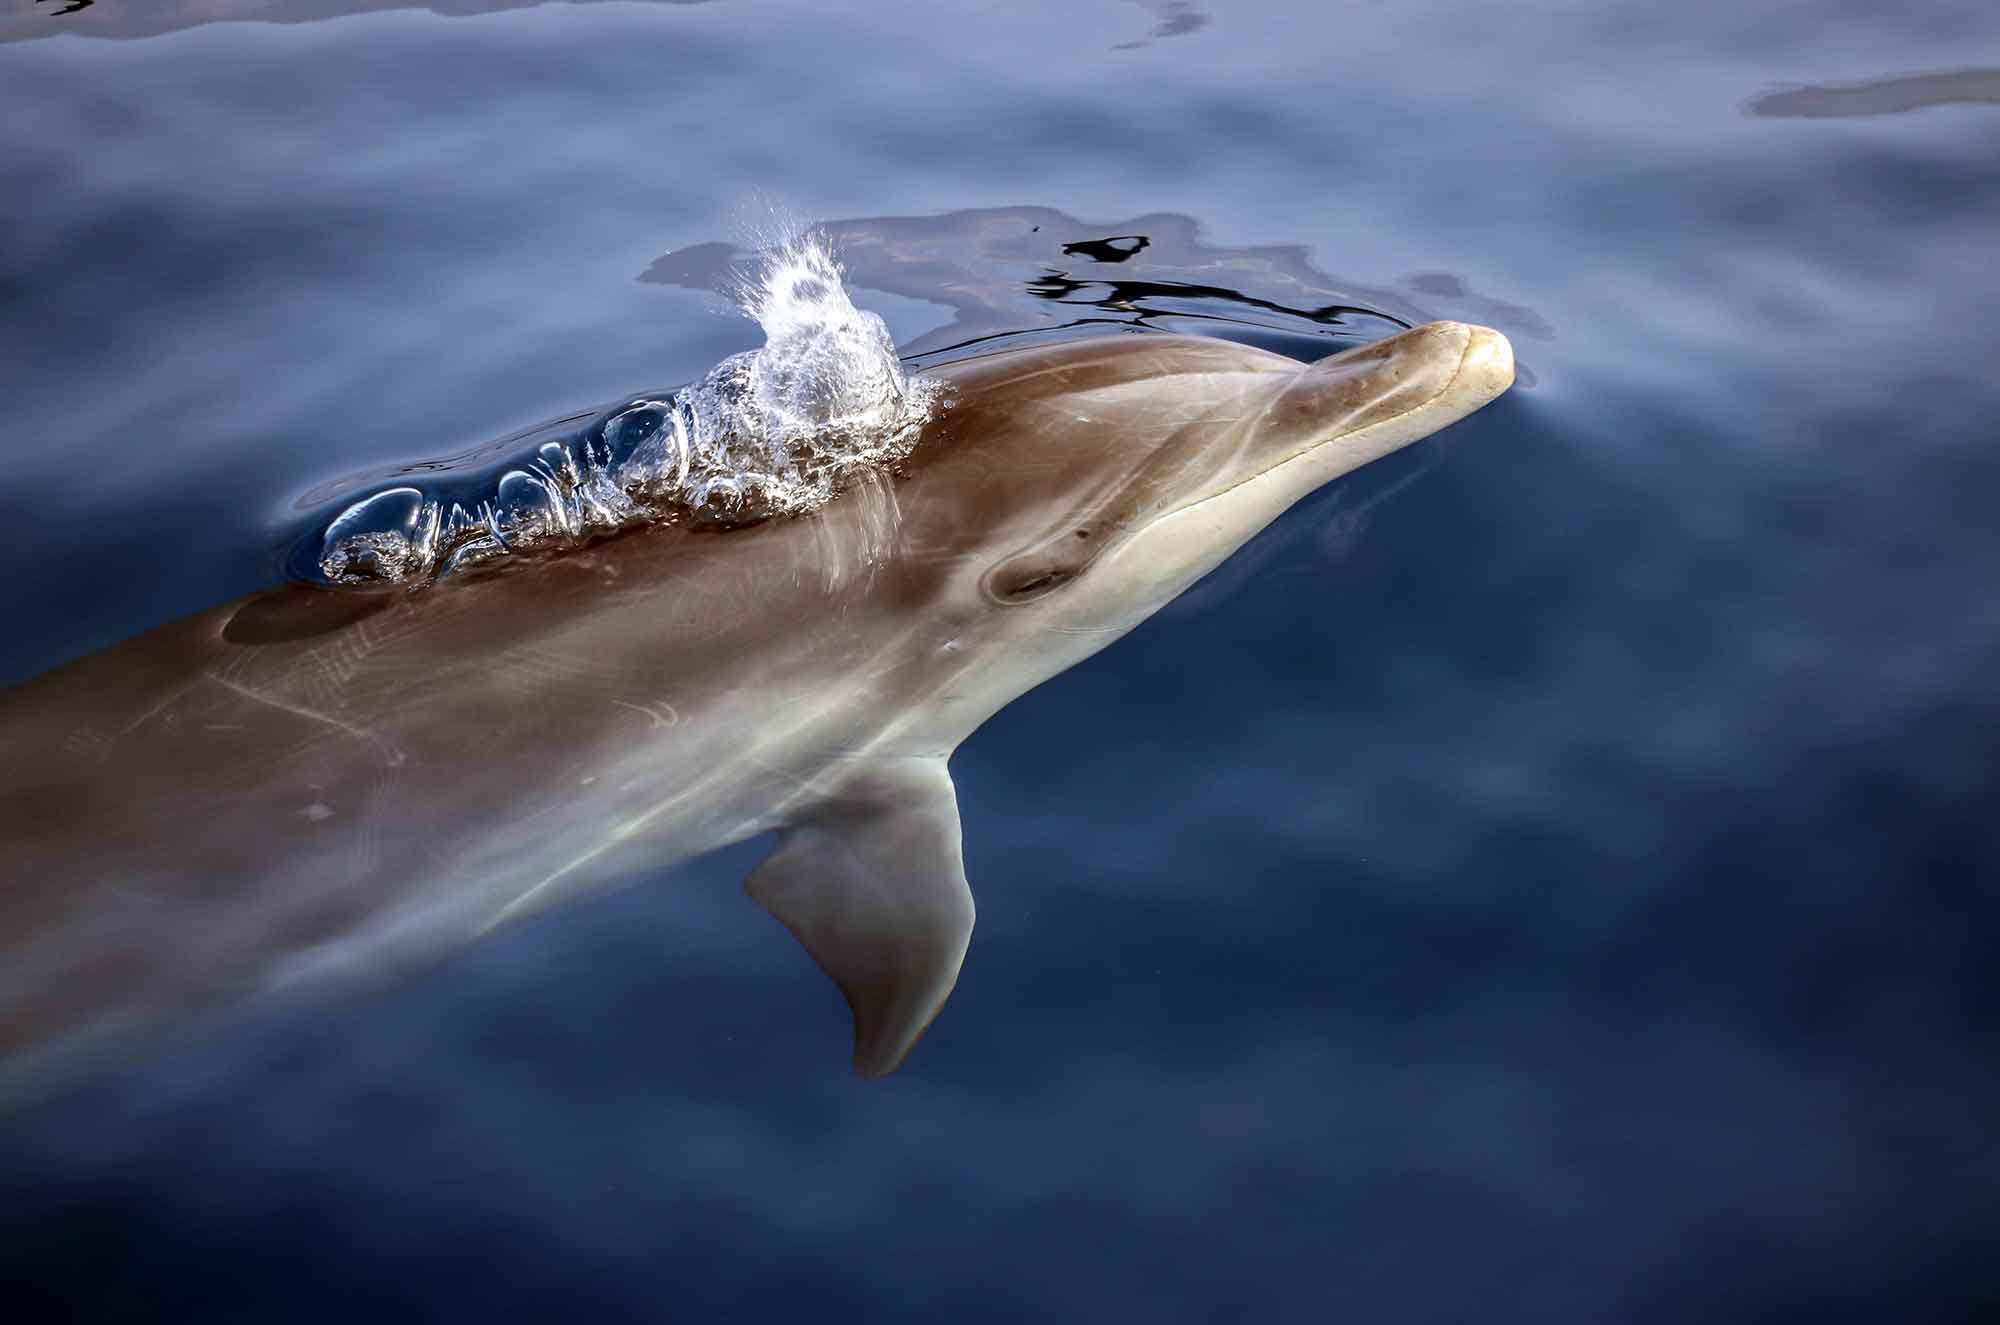 Bottlenose dolphins are a resident cetacean species in San Diego.